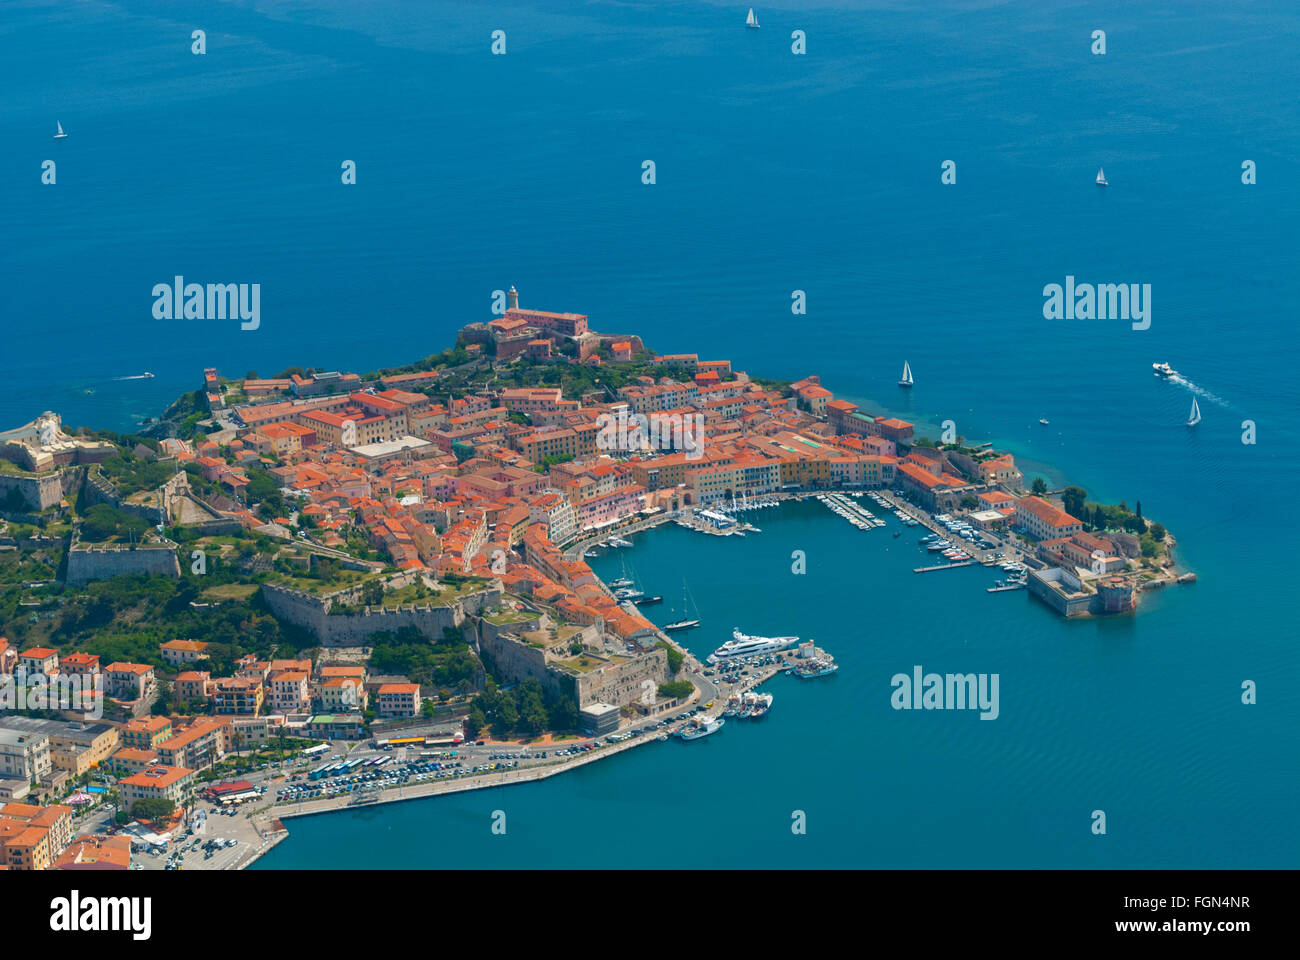 Elba Island High Resolution Stock Photography and Images - Alamy